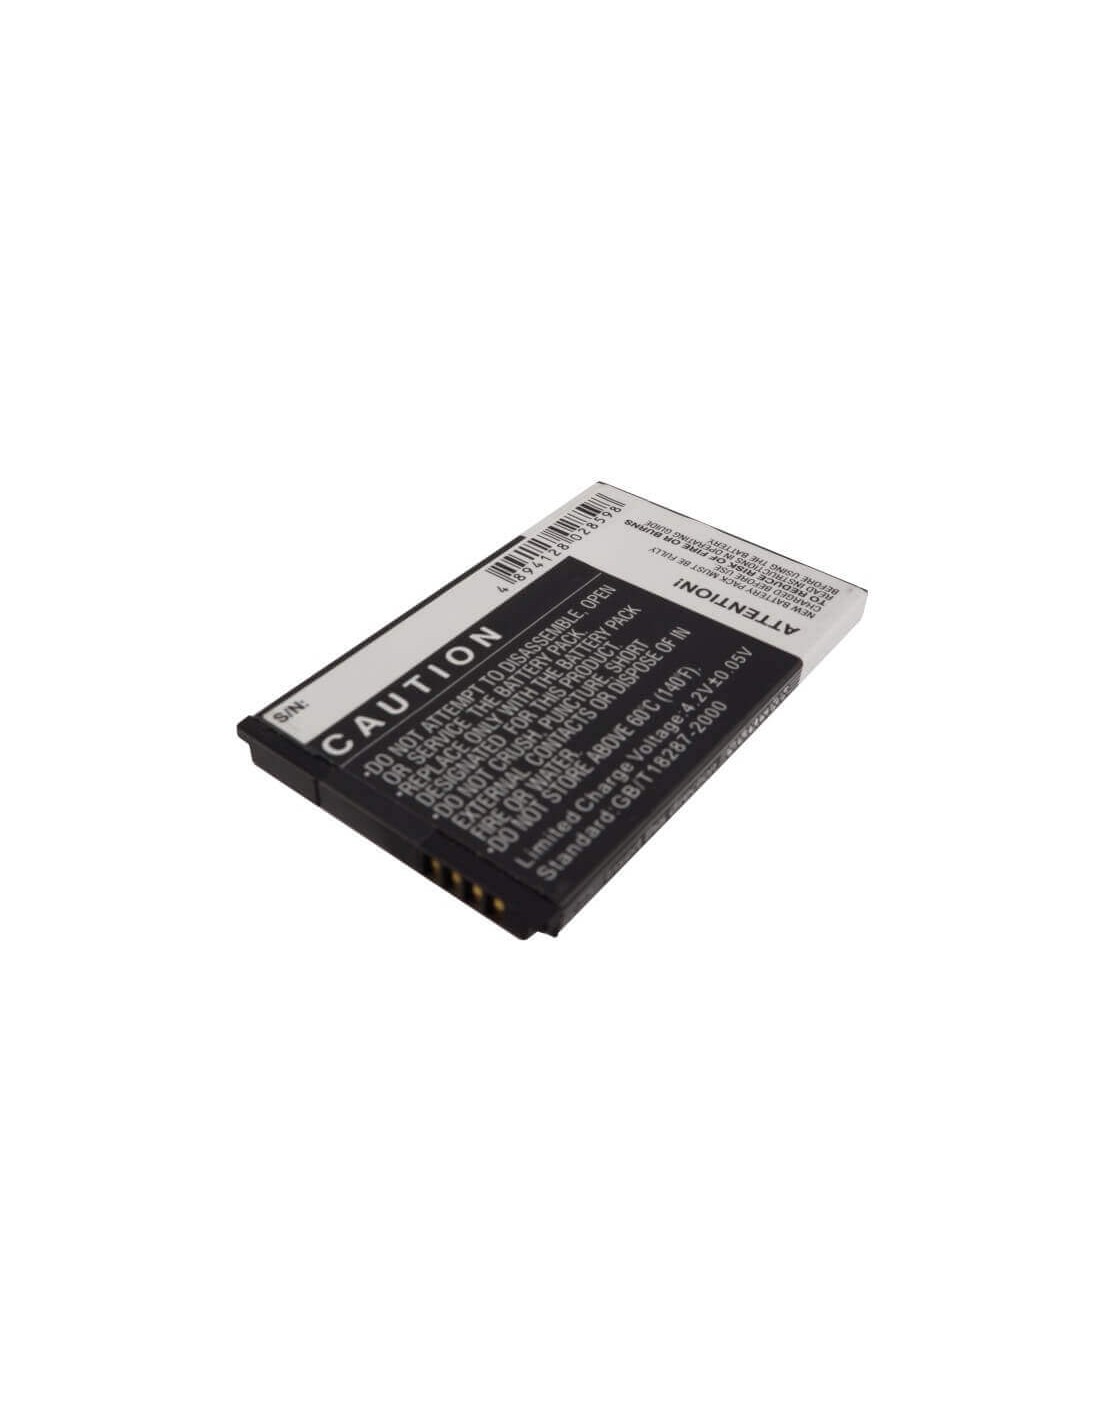 Battery for HTC Touch Diamond 2, Touch Diamond II, Topaz 100 3.7V, 1100mAh - 4.07Wh